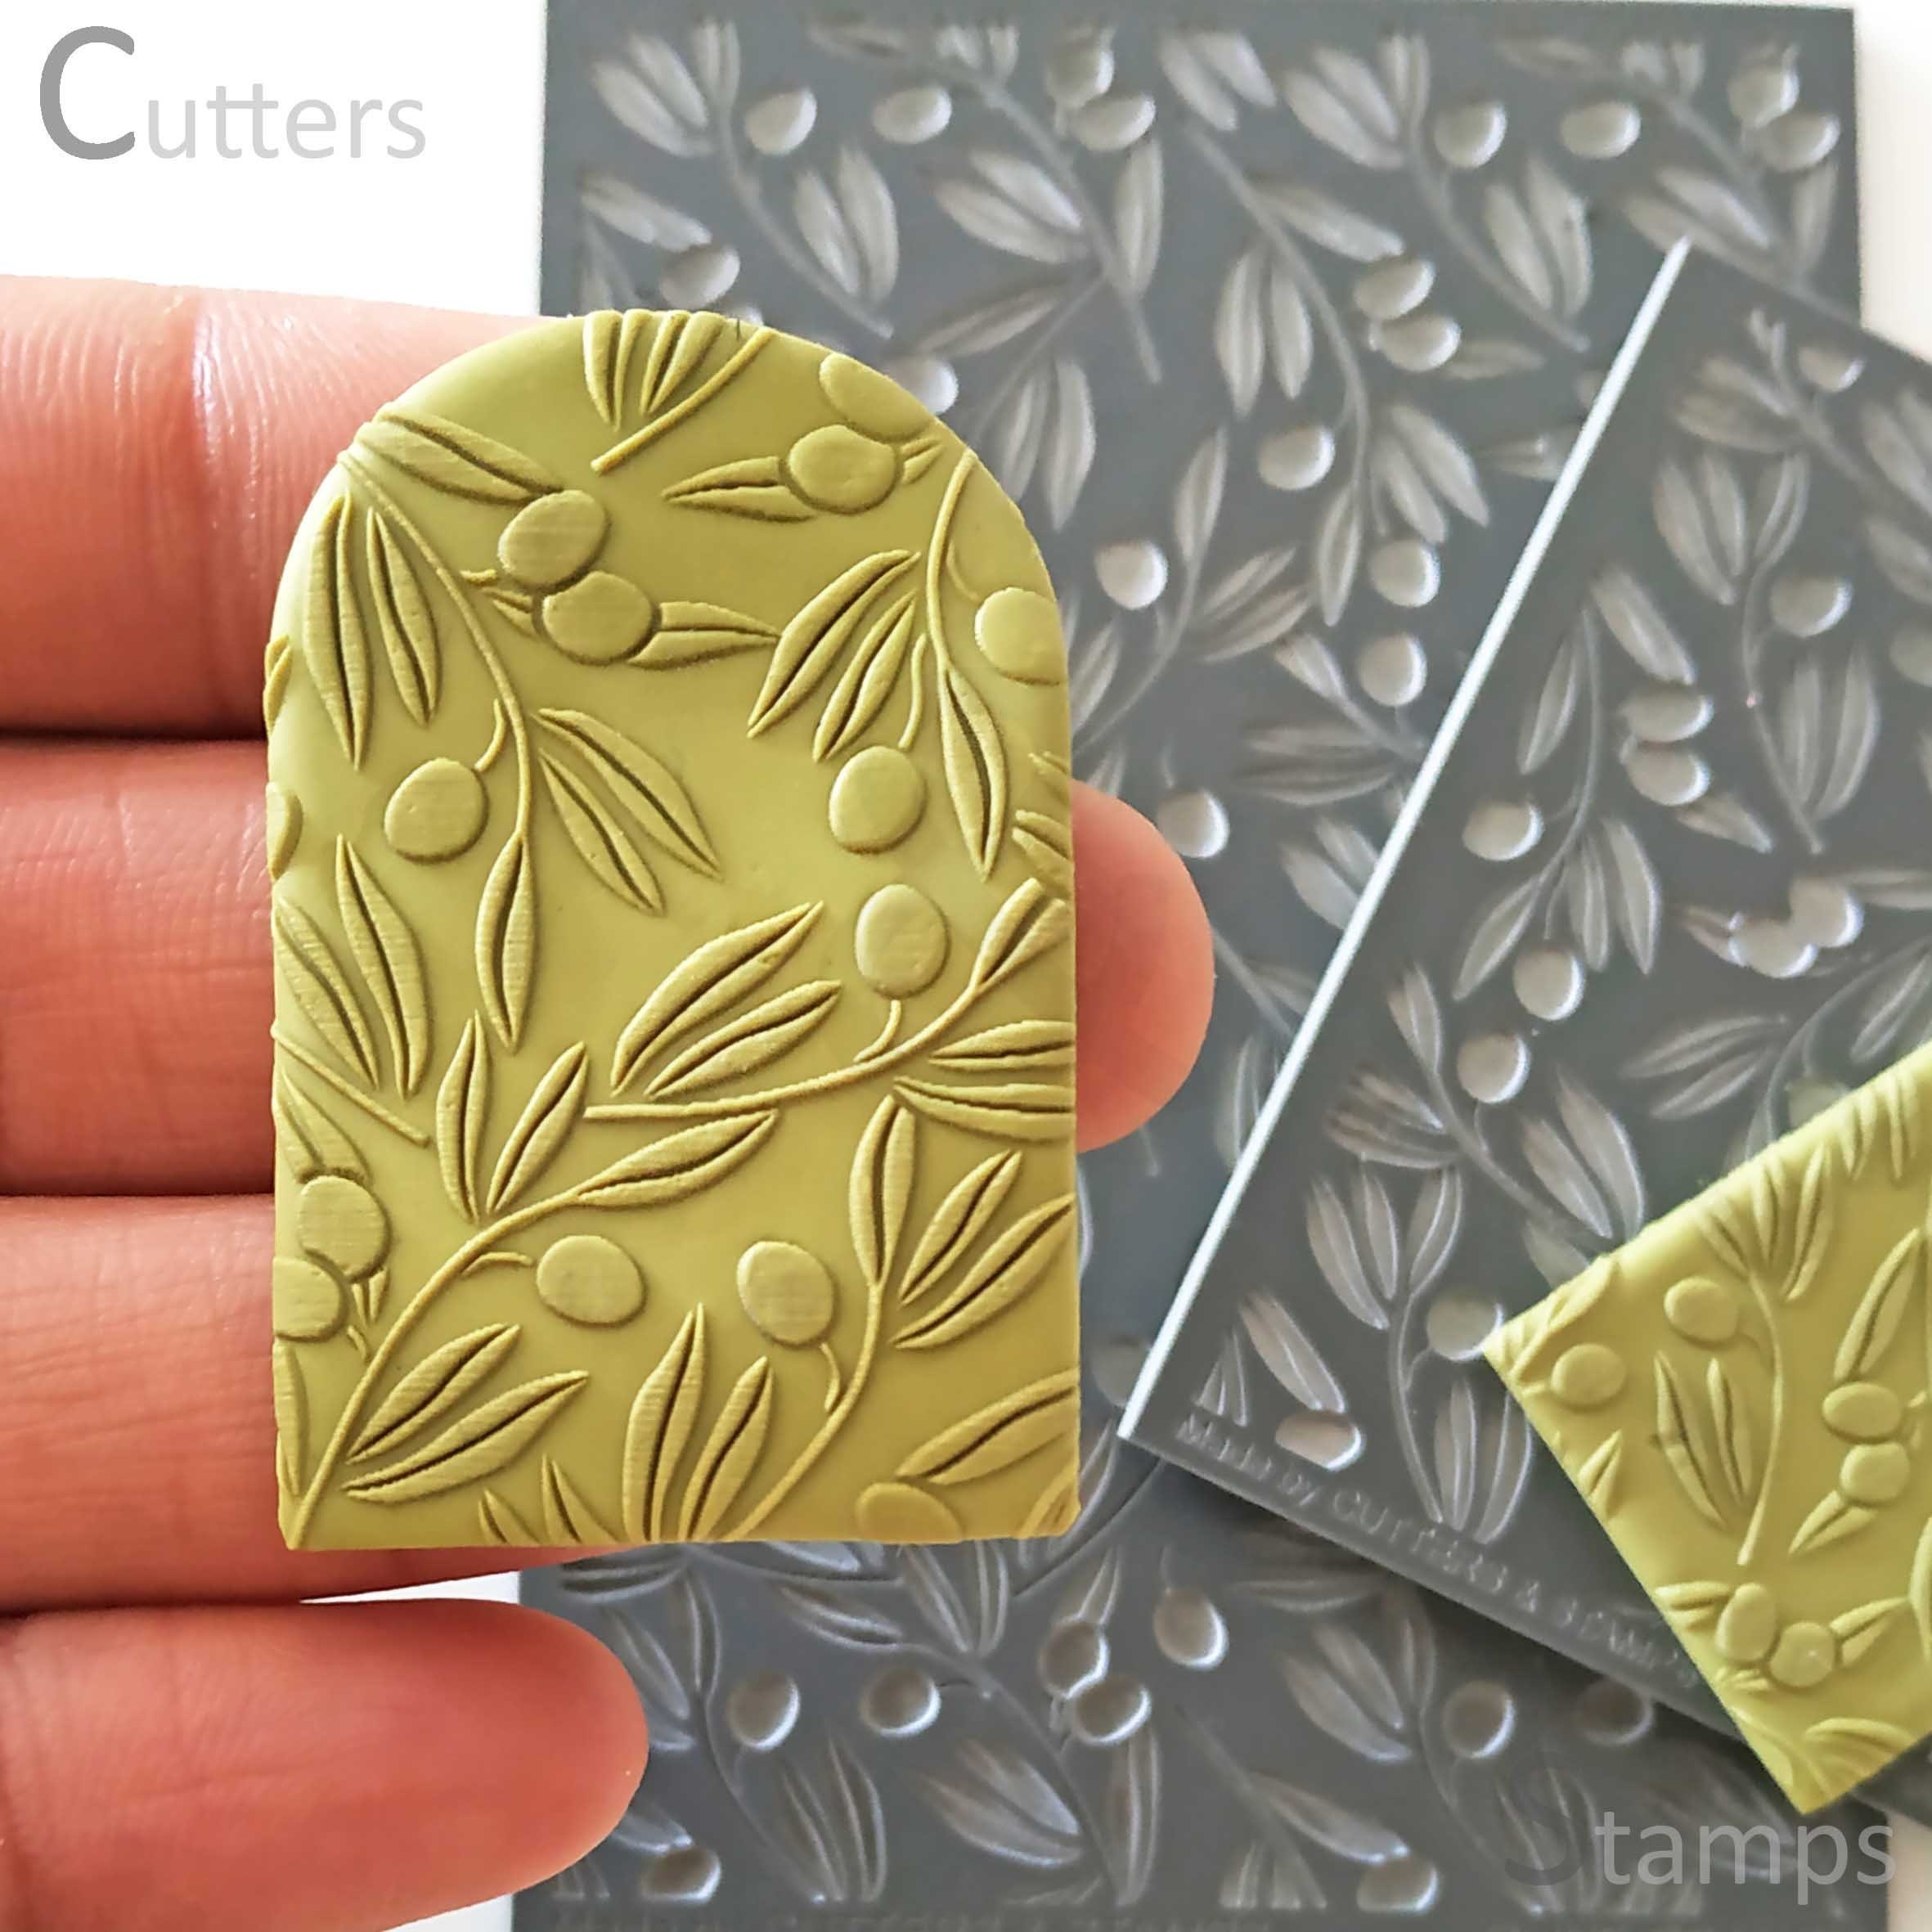 CLAY STAMP, POLYMER Clay Stamp, Embossing Stamp, Branches 02 Resin Set of 6  Embossing Simple Edge Minimalist Clay Stamps for Gifts / FLS028 